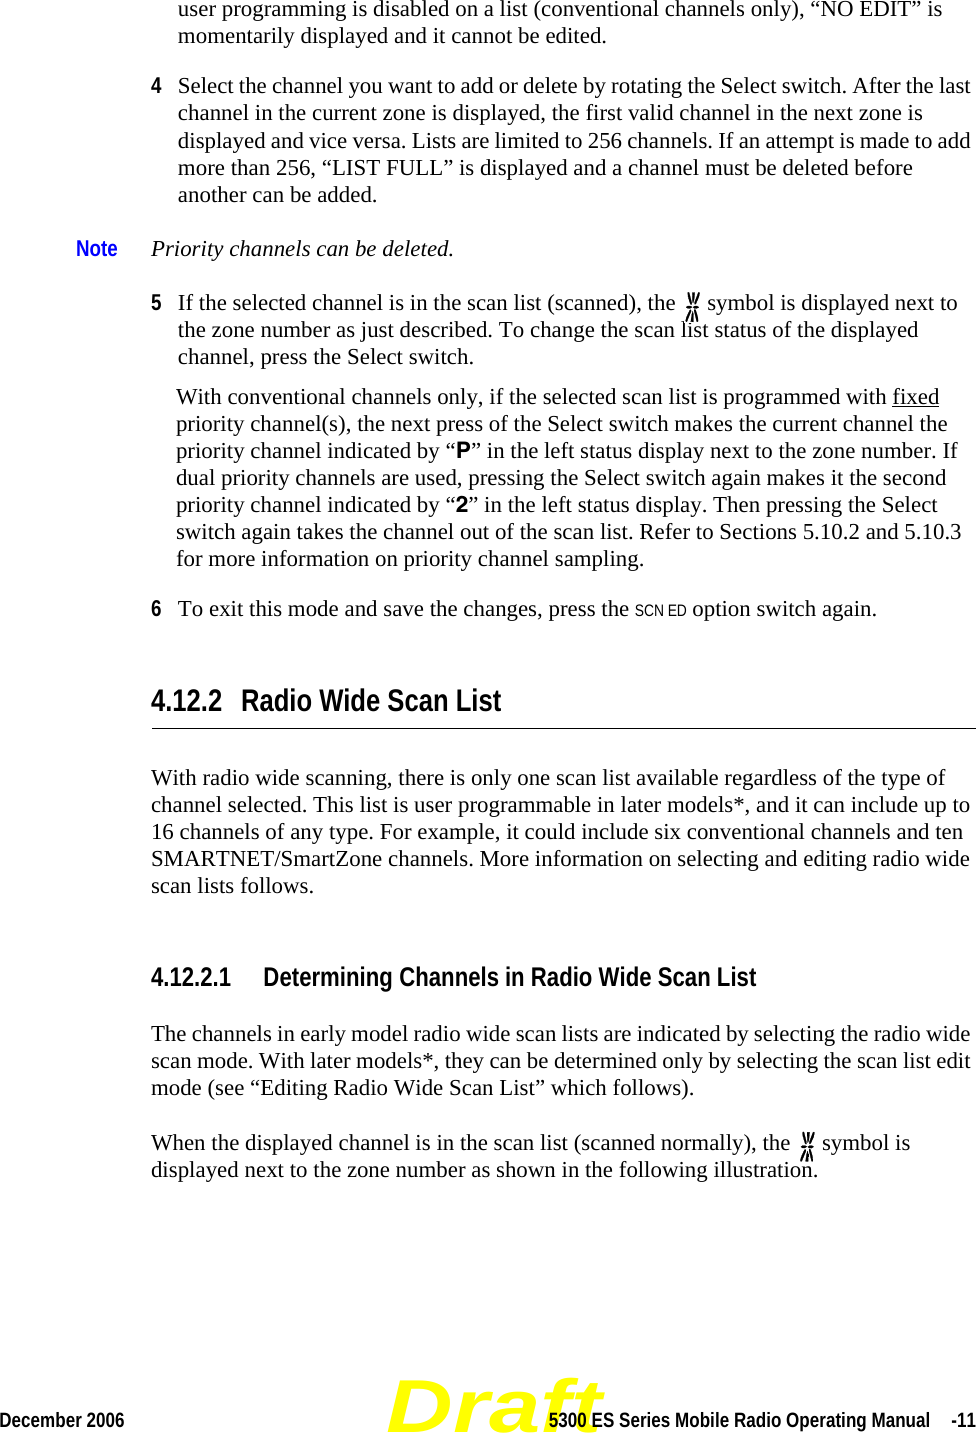 DraftDecember 2006 5300 ES Series Mobile Radio Operating Manual  -11user programming is disabled on a list (conventional channels only), “NO EDIT” is momentarily displayed and it cannot be edited.4Select the channel you want to add or delete by rotating the Select switch. After the last channel in the current zone is displayed, the first valid channel in the next zone is displayed and vice versa. Lists are limited to 256 channels. If an attempt is made to add more than 256, “LIST FULL” is displayed and a channel must be deleted before another can be added.Note Priority channels can be deleted.5If the selected channel is in the scan list (scanned), the   symbol is displayed next to the zone number as just described. To change the scan list status of the displayed channel, press the Select switch.With conventional channels only, if the selected scan list is programmed with fixed priority channel(s), the next press of the Select switch makes the current channel the priority channel indicated by “P” in the left status display next to the zone number. If dual priority channels are used, pressing the Select switch again makes it the second priority channel indicated by “2” in the left status display. Then pressing the Select switch again takes the channel out of the scan list. Refer to Sections 5.10.2 and 5.10.3 for more information on priority channel sampling.6To exit this mode and save the changes, press the SCN ED option switch again.4.12.2 Radio Wide Scan ListWith radio wide scanning, there is only one scan list available regardless of the type of channel selected. This list is user programmable in later models*, and it can include up to 16 channels of any type. For example, it could include six conventional channels and ten SMARTNET/SmartZone channels. More information on selecting and editing radio wide scan lists follows.4.12.2.1 Determining Channels in Radio Wide Scan ListThe channels in early model radio wide scan lists are indicated by selecting the radio wide scan mode. With later models*, they can be determined only by selecting the scan list edit mode (see “Editing Radio Wide Scan List” which follows).When the displayed channel is in the scan list (scanned normally), the   symbol is displayed next to the zone number as shown in the following illustration.